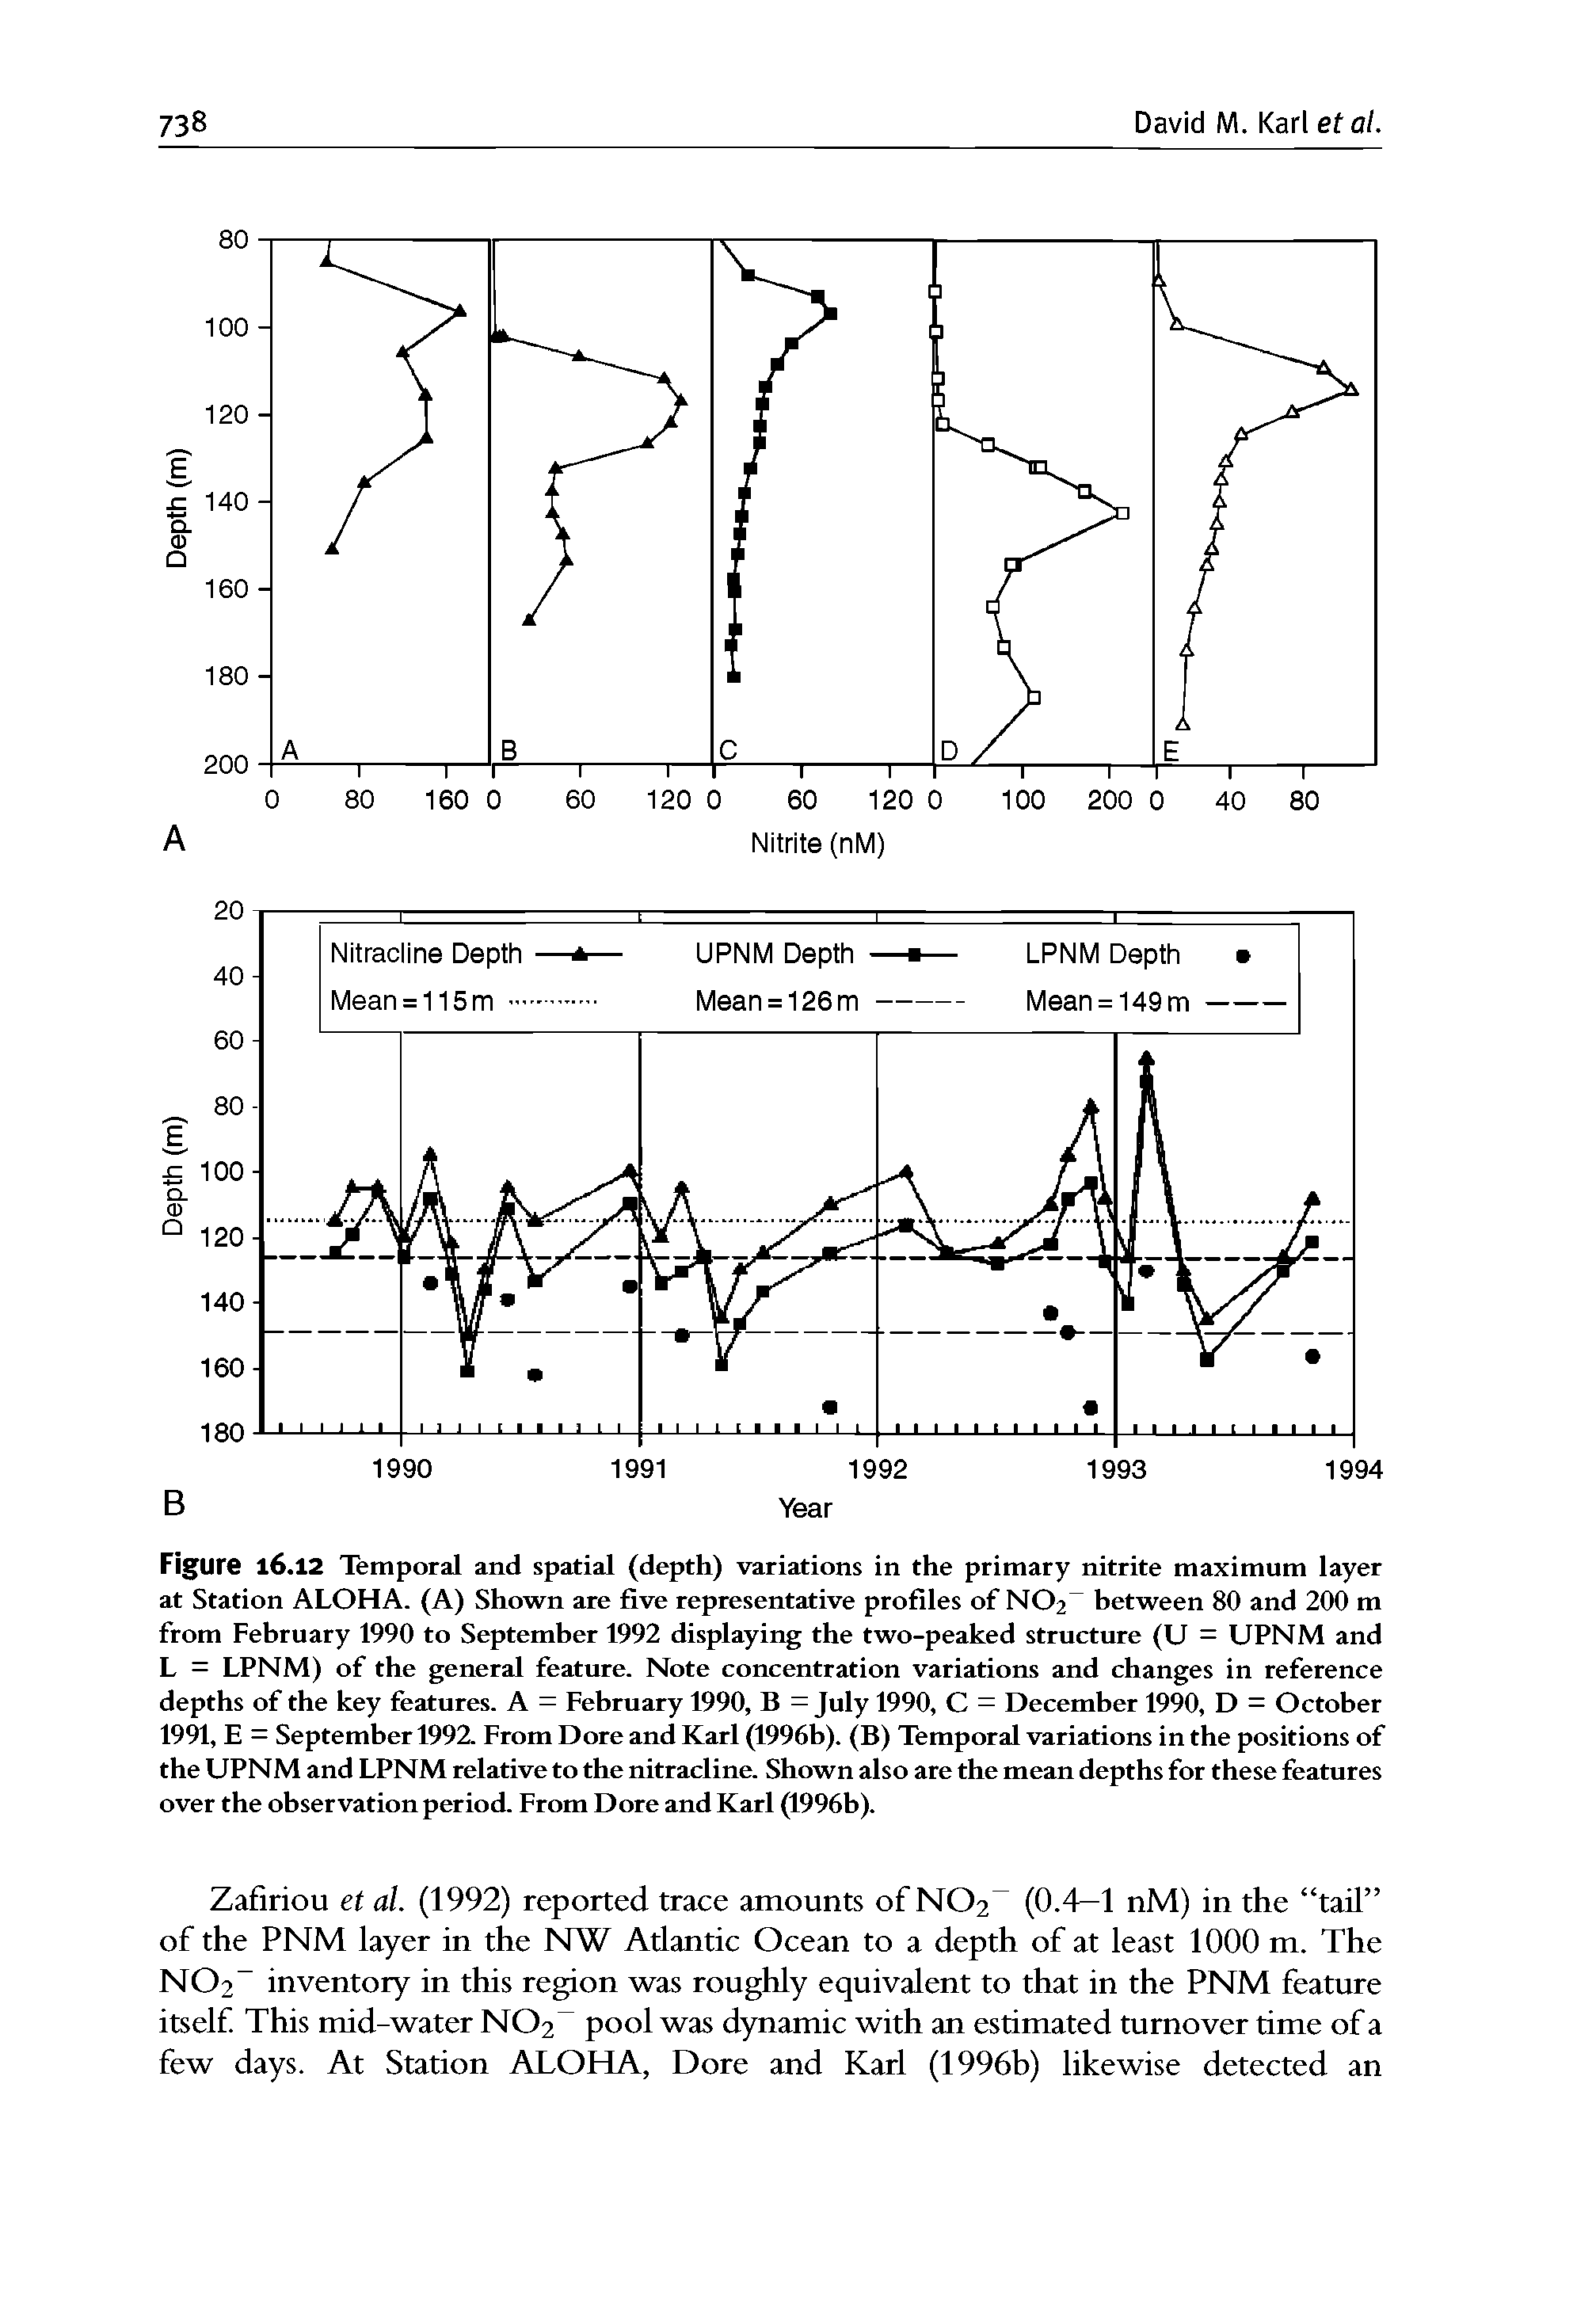 Figure 16.12 Temporal and spatial (depth) variations in the primary nitrite maximum layer at Station ALOHA. (A) Shown are five representative profiles of NO2 between 80 and 200 m from February 1990 to September 1992 displayii the two-peaked structure (U = UPNM and L = LPNM) of the general feature. Note concentration variations and changes in reference depths of the key features. A = February 1990, B = July 1990, C = December 1990, D = October 1991, E = September 1992. From Dore and Karl (1996b). (B) Temporal variations in the positions of the UPNM and LPNM relative to the nitracline. Shown also are the mean depths for these features over the observation period. From Dore and Karl (1996b).